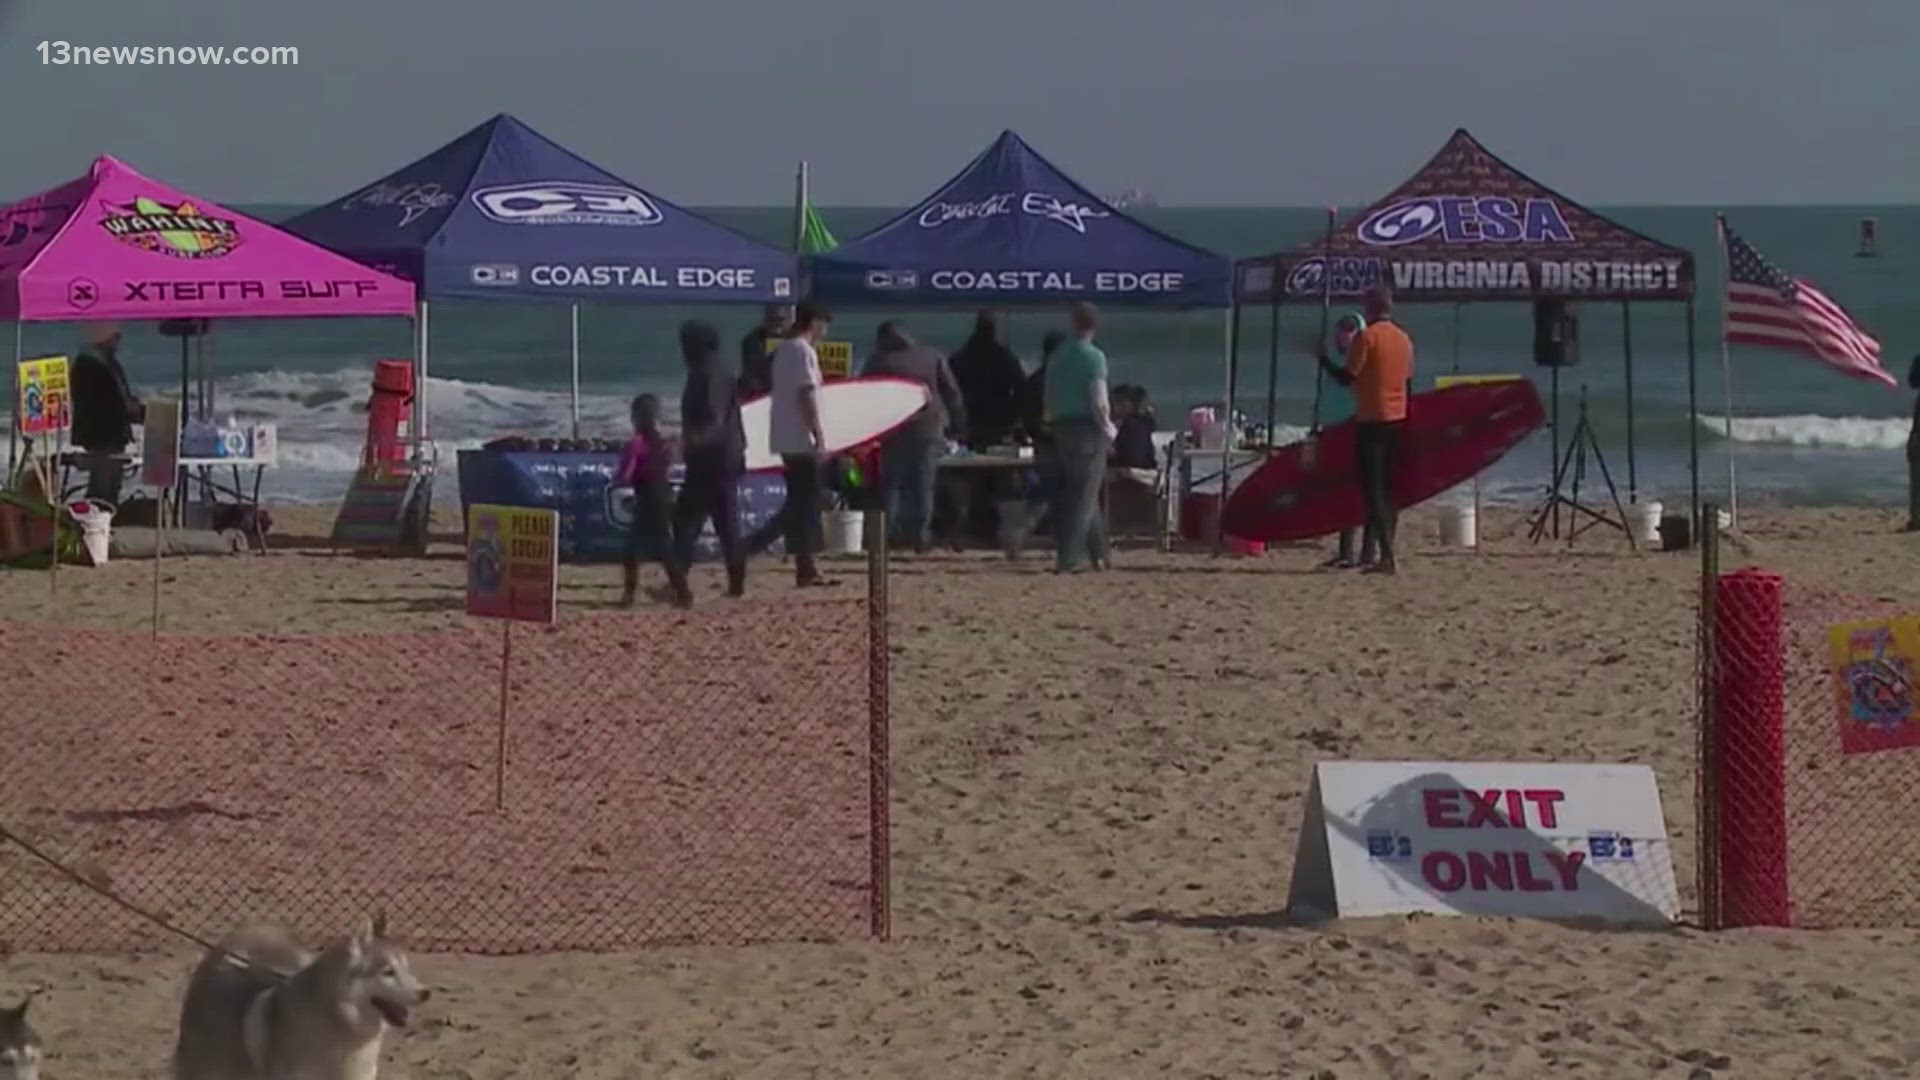 For 10 years, Coastal Edge has held the Surf for the Cure to raise money for cancer patients and cancer research.